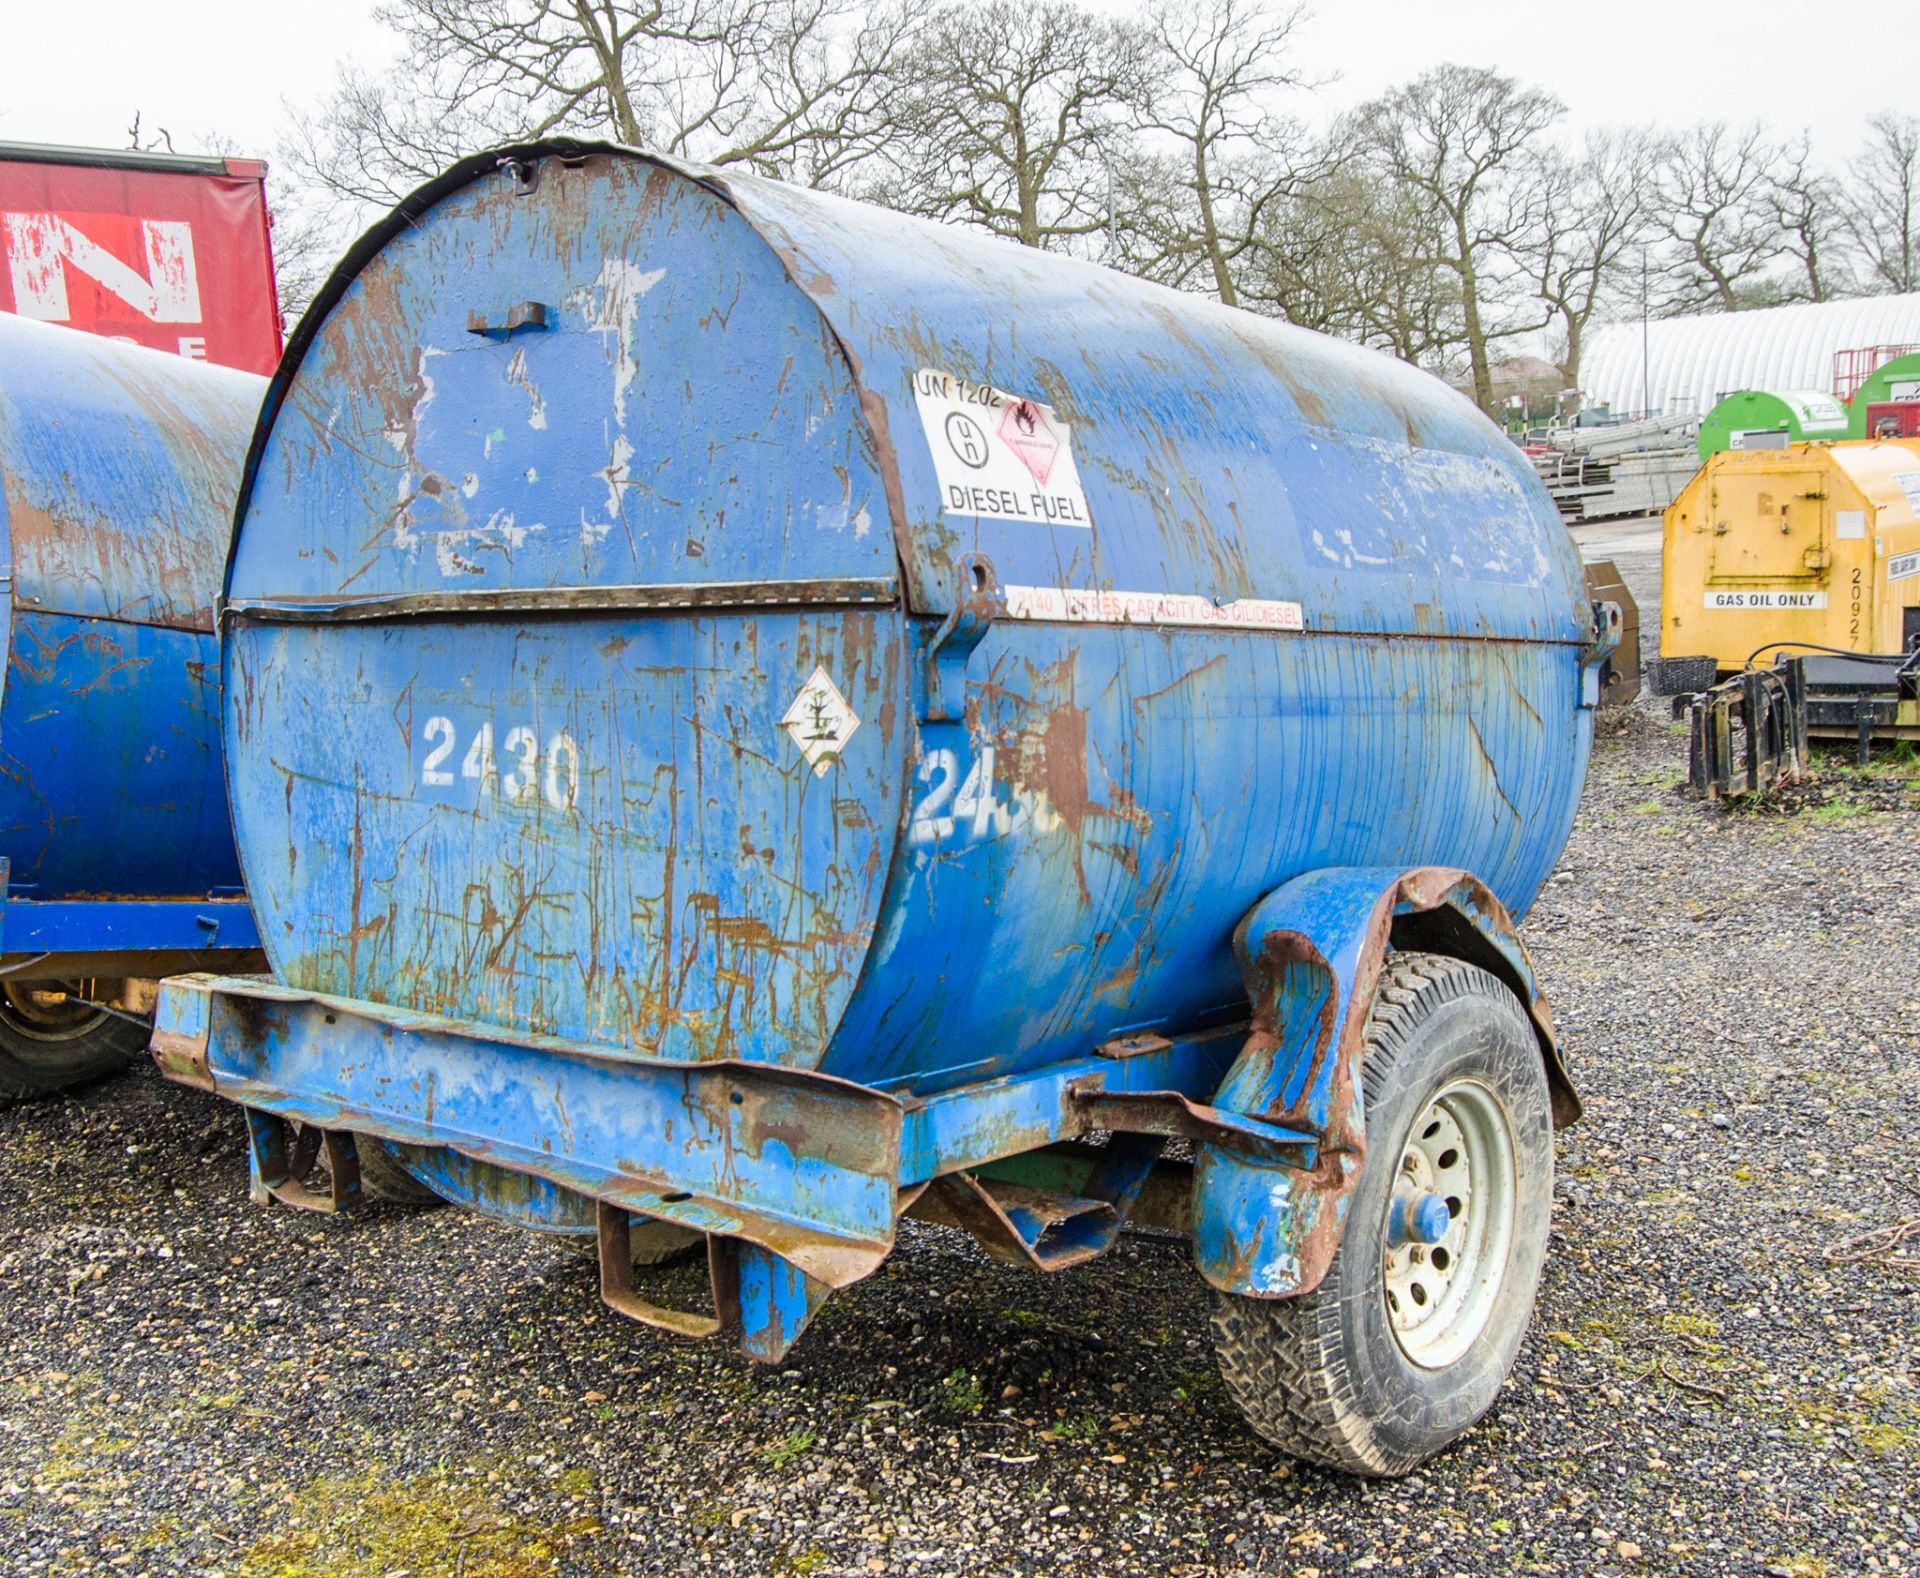 Trailer Engineering 2140 litre site tow bunded fuel bowser c/w manual pump, delivery hose & nozzle - Image 3 of 7